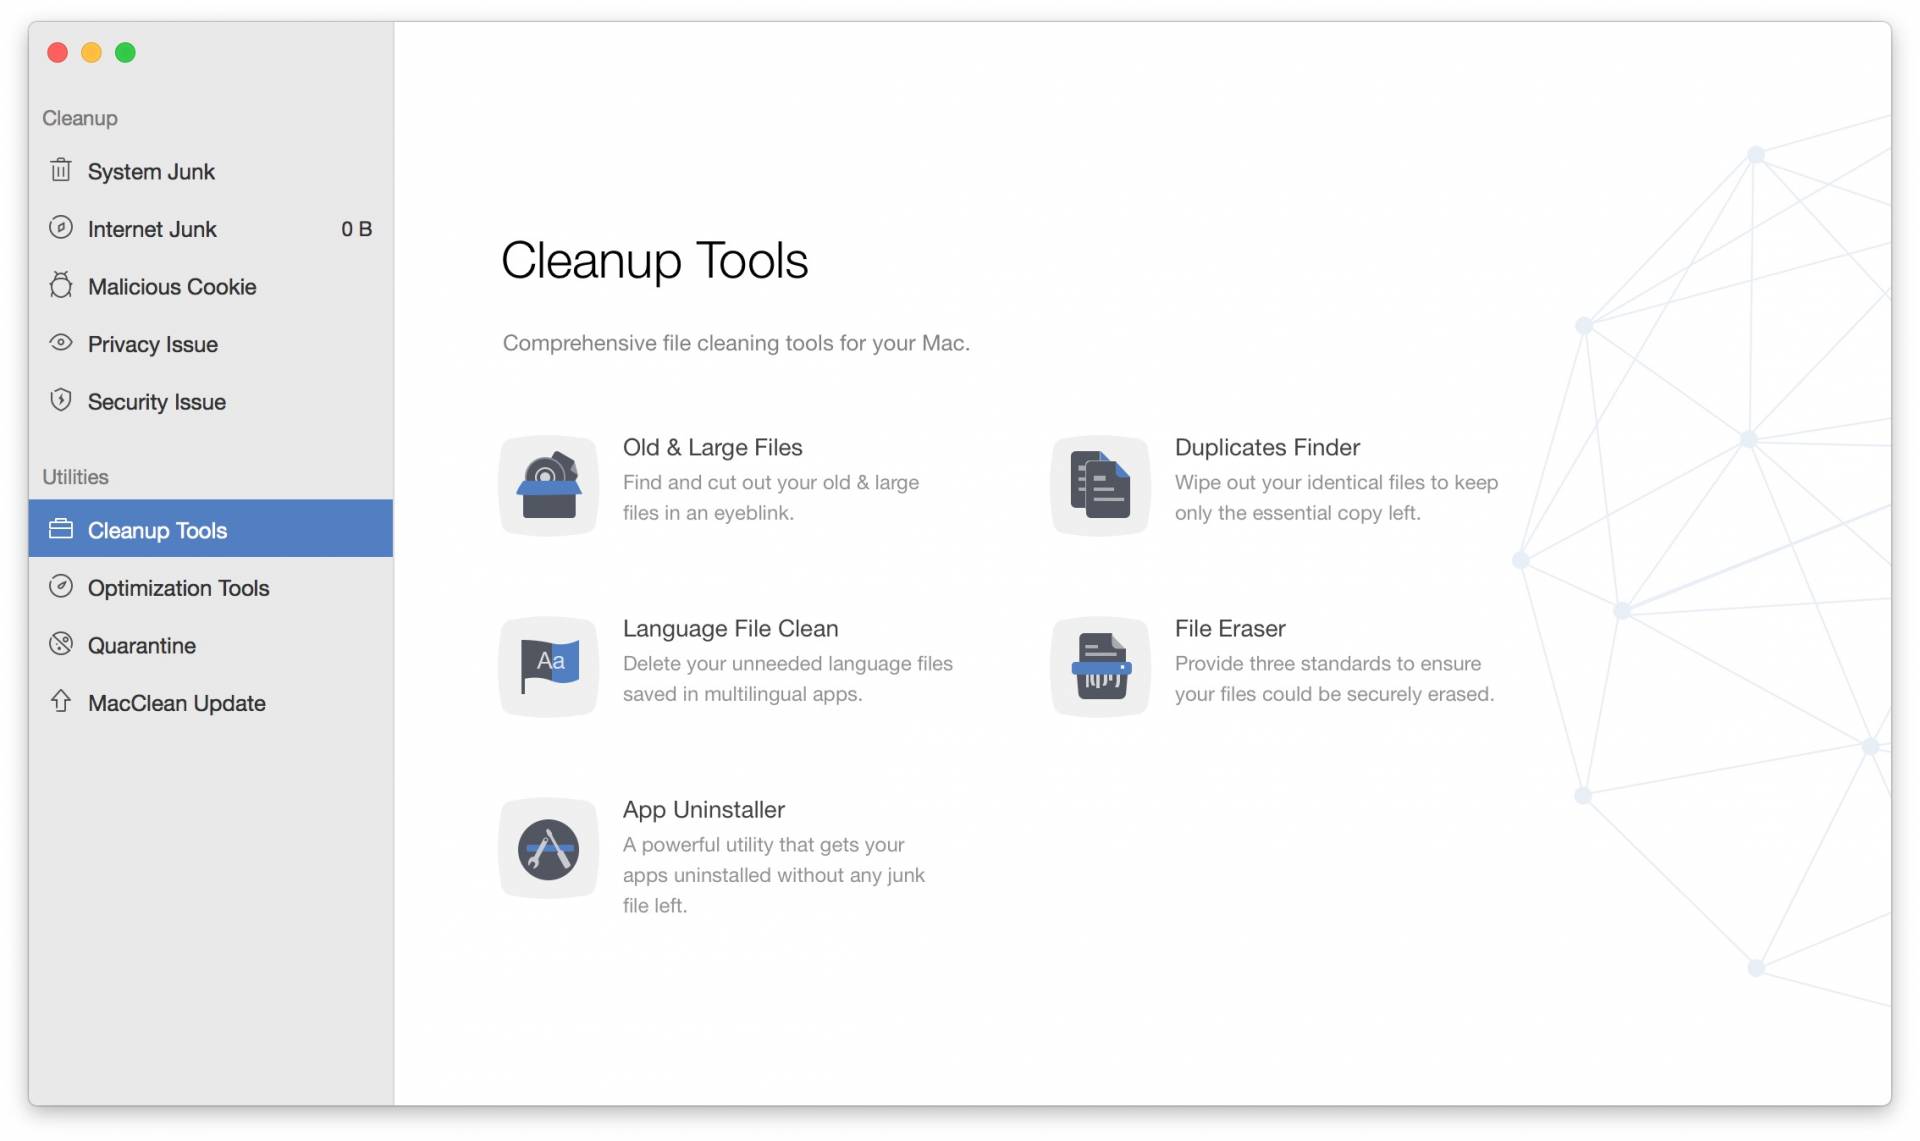 Cleanup Tools